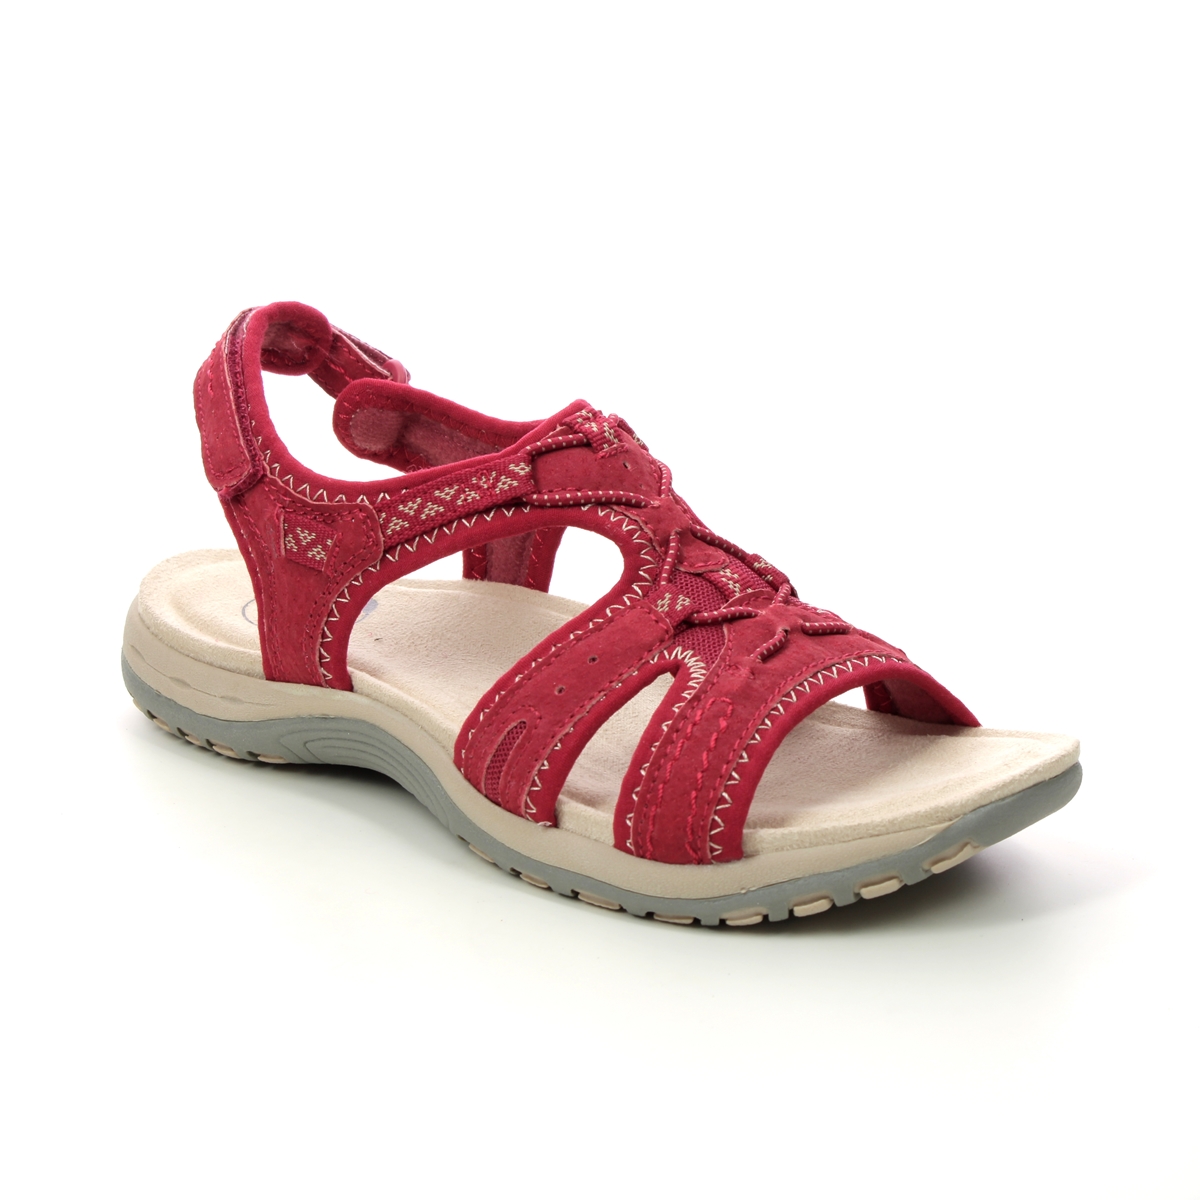 Earth Spirit Fairmount Red suede Womens Walking Sandals 40528-83 in a Plain Leather in Size 8